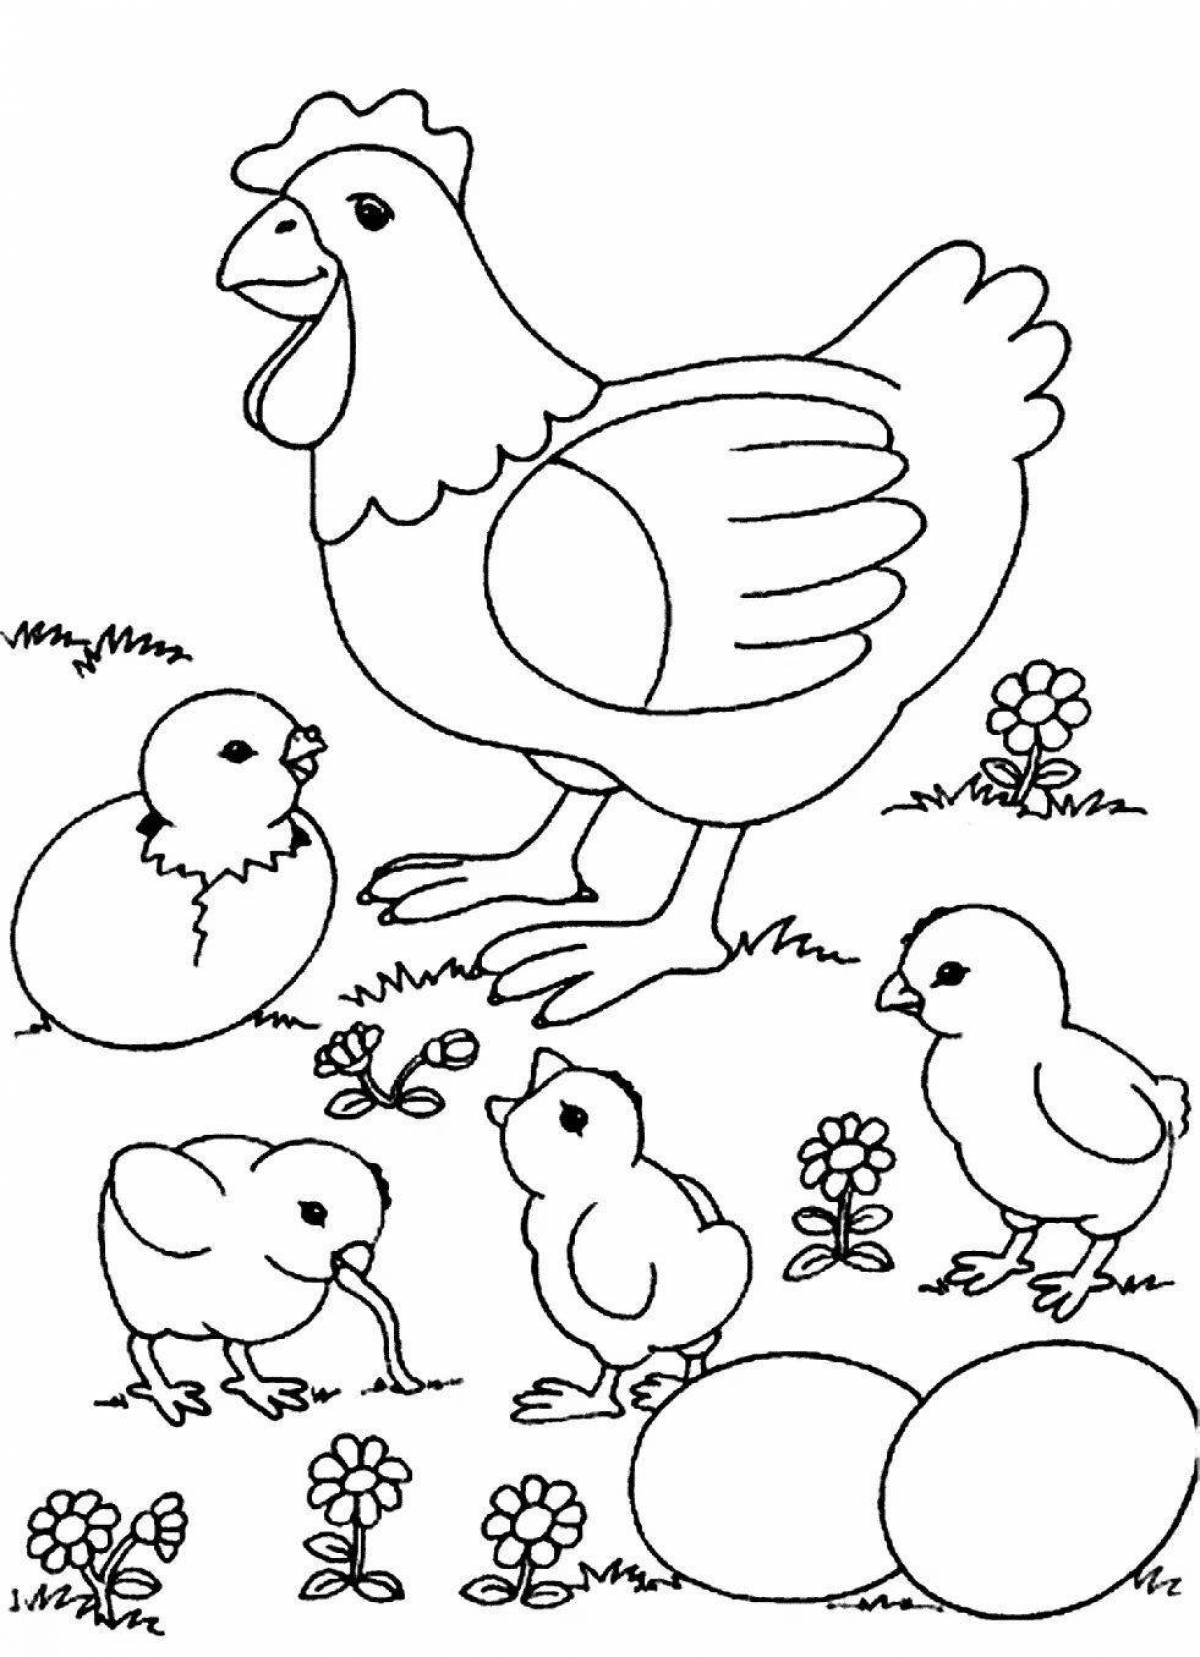 Fun bird coloring page for juniors